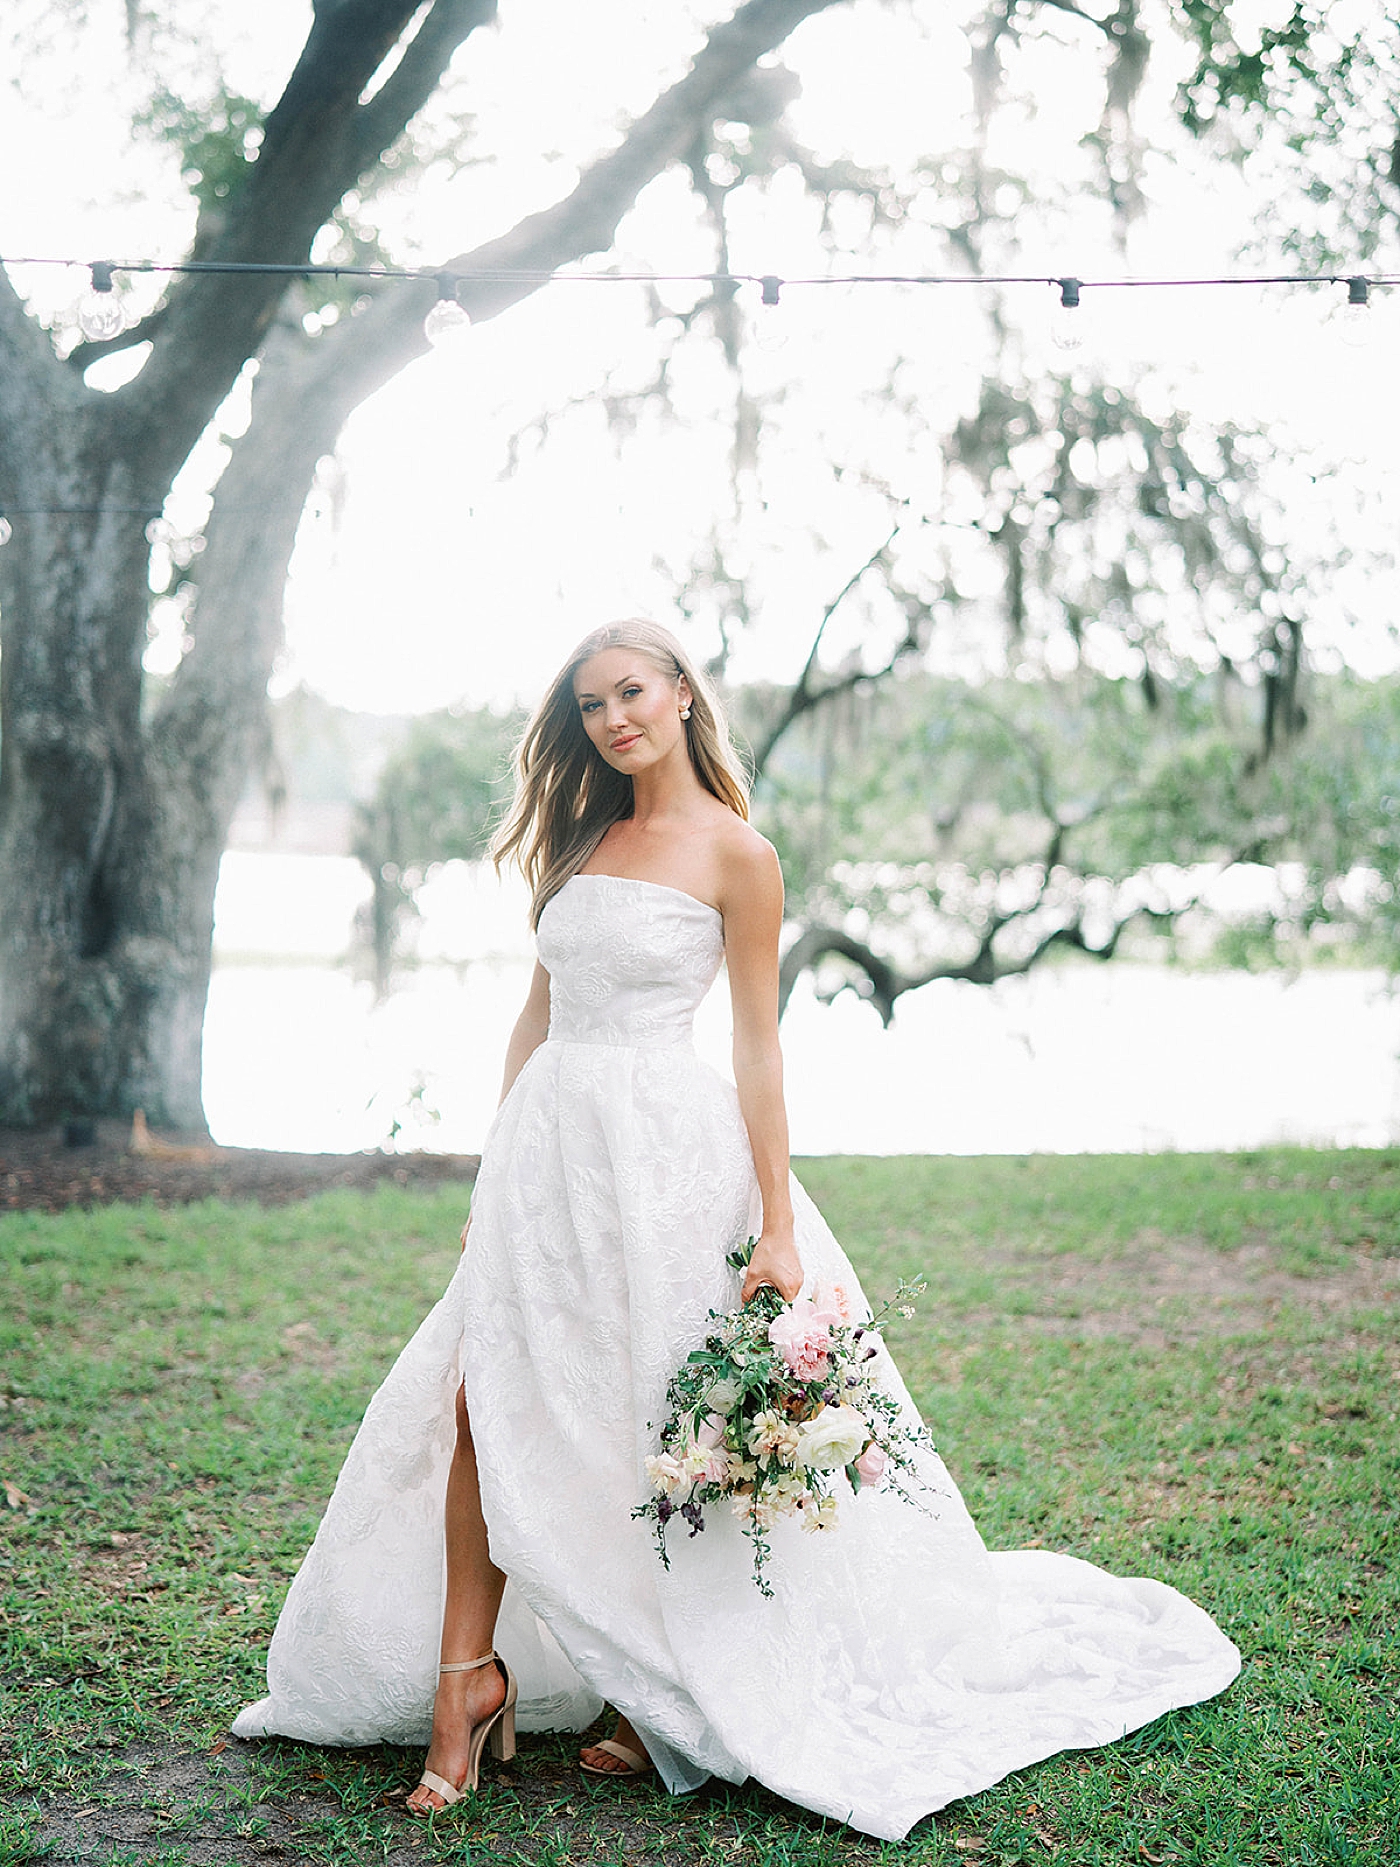 Bride holding a bouquet walking | Charleston Photography Workshop with Carters Event Co